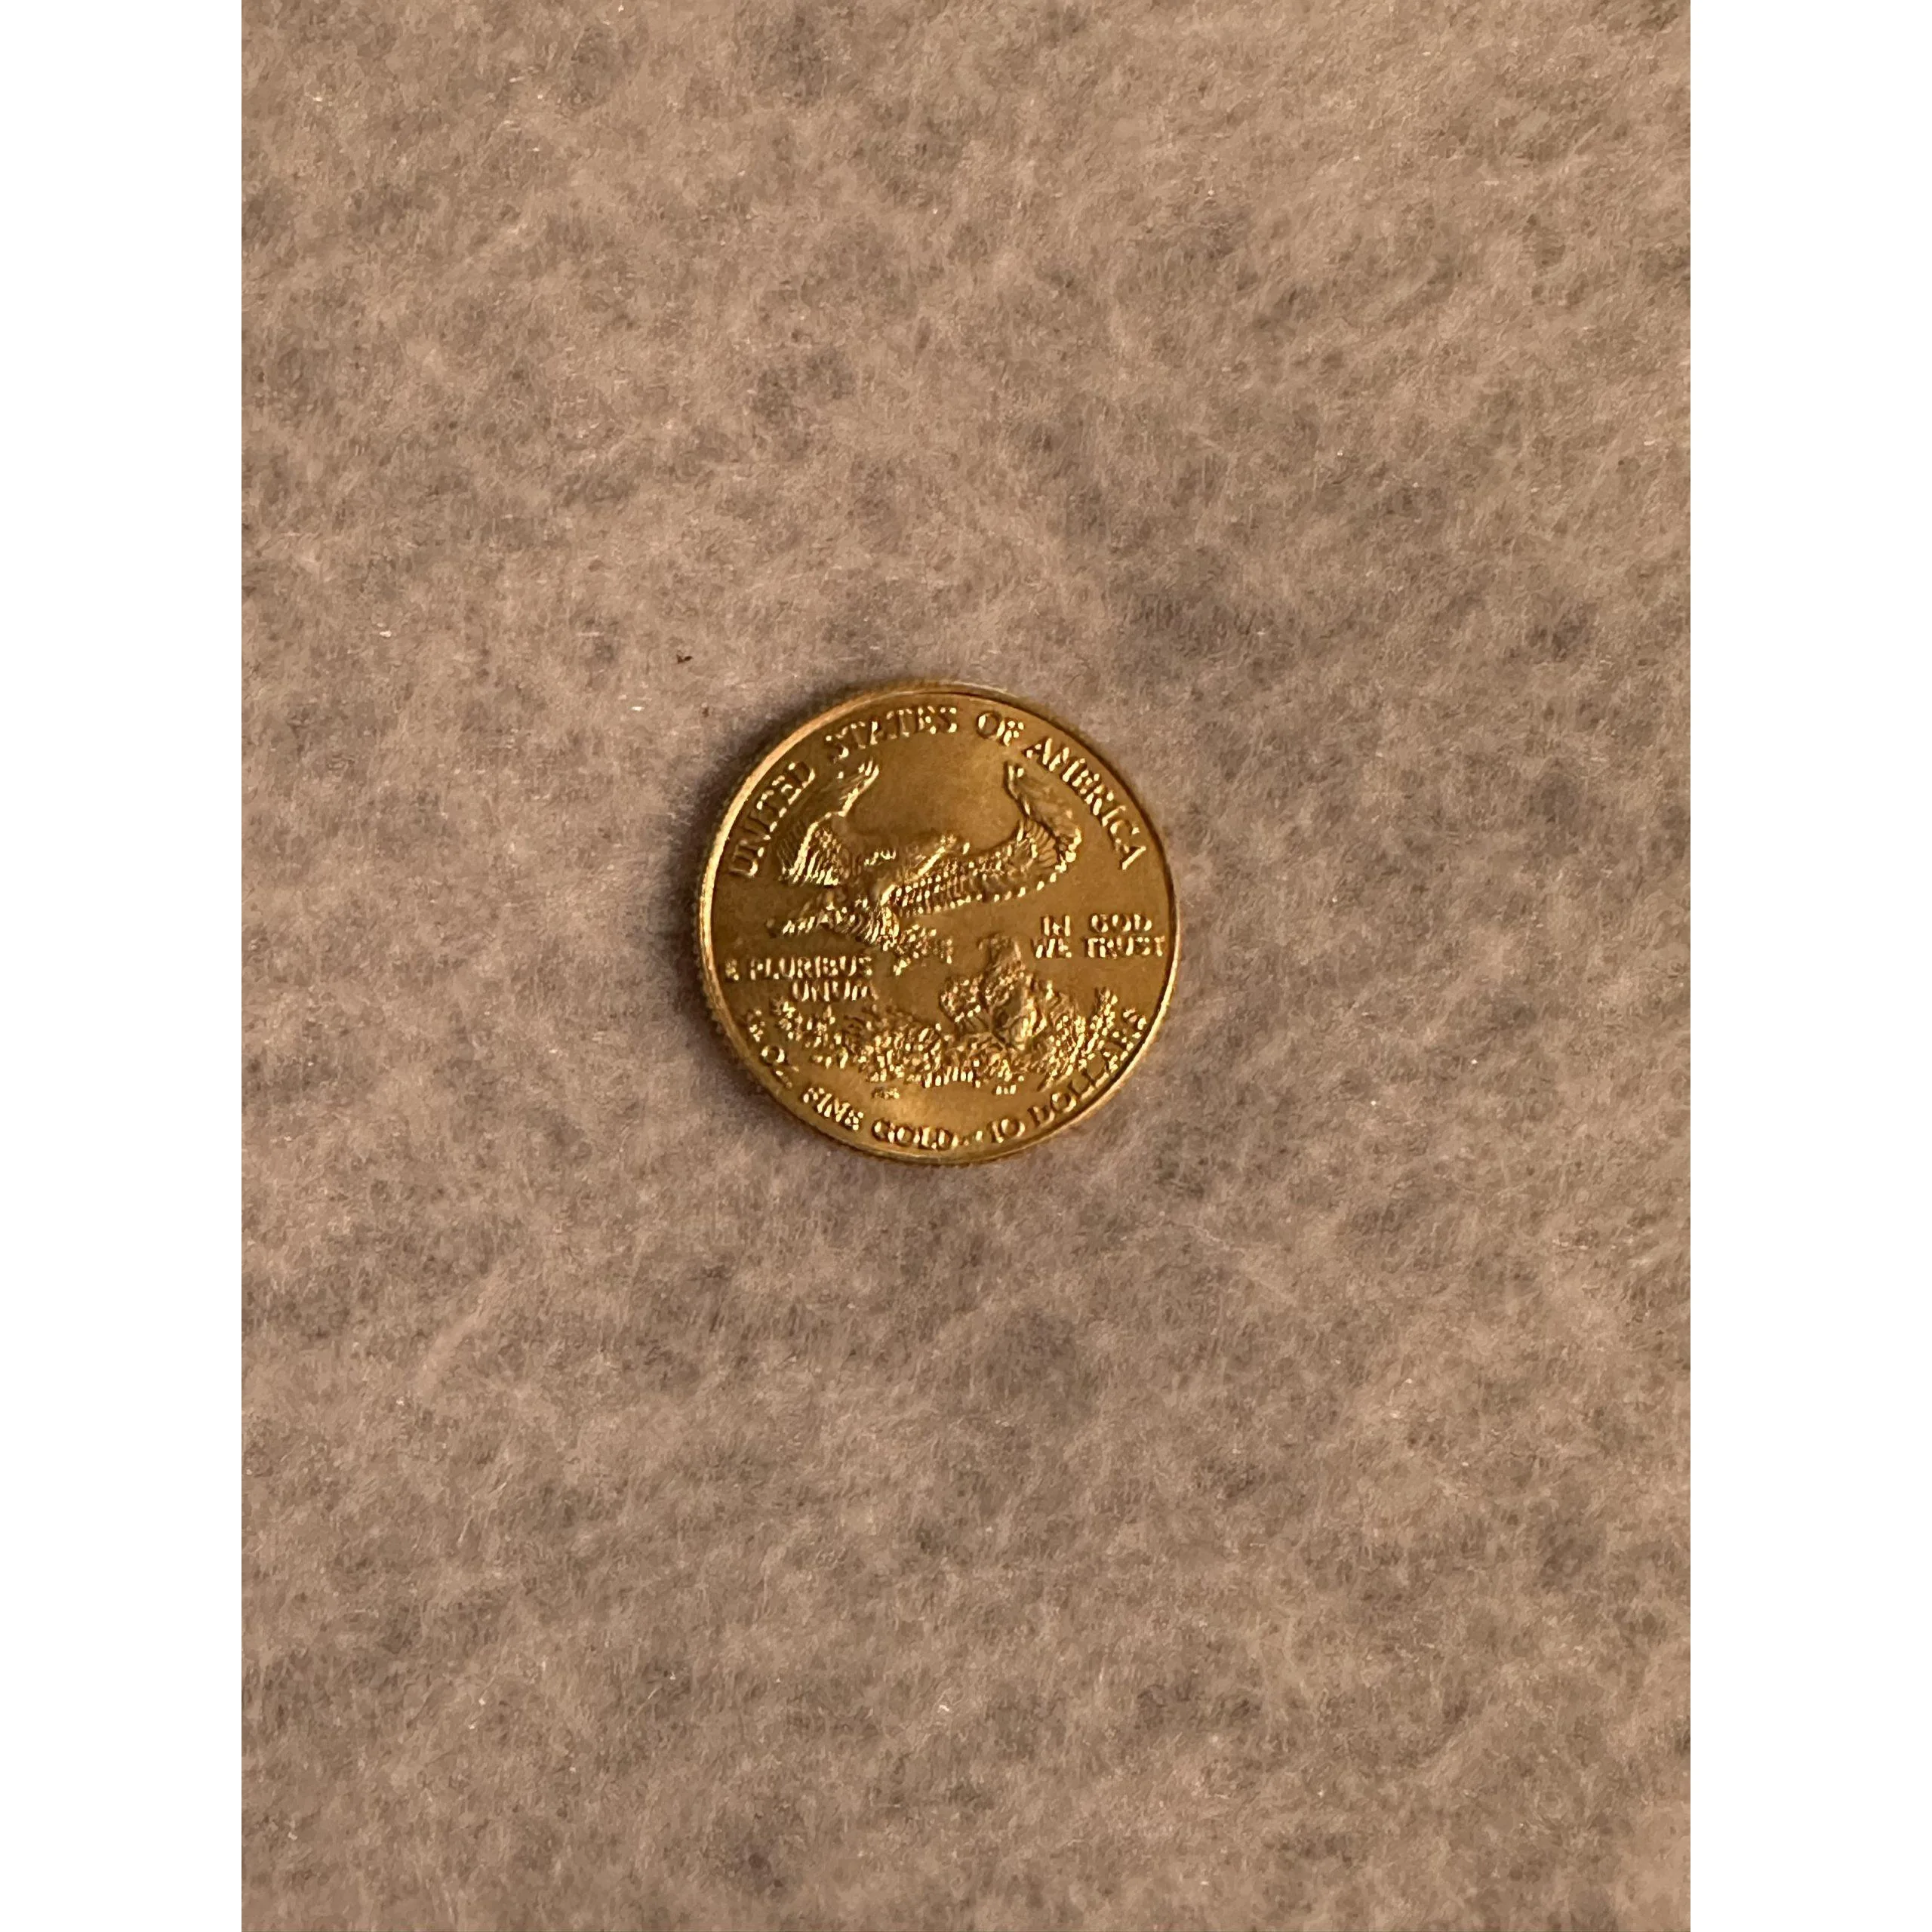 $10 U.S. Gold eagle 1/4 ounce gold coin Prehistoric Online